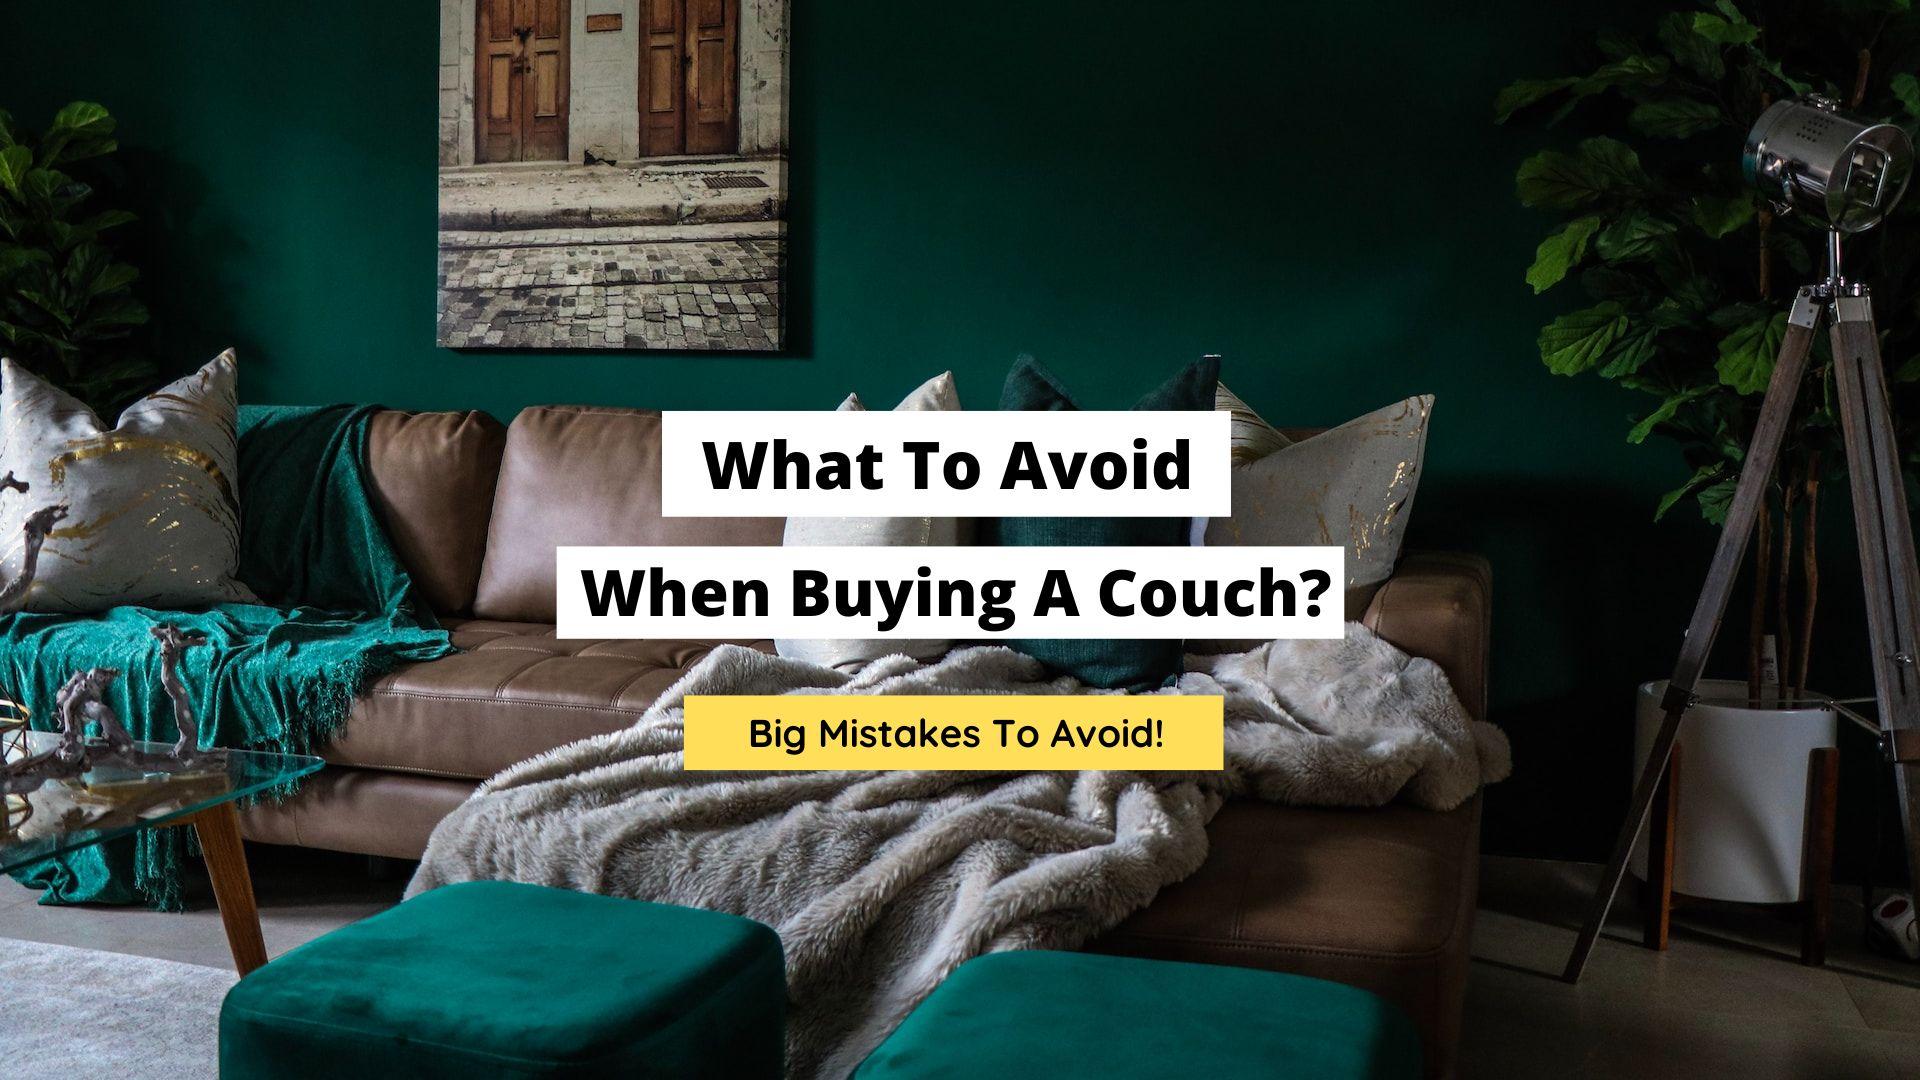 What To Avoid When Buying A Couch